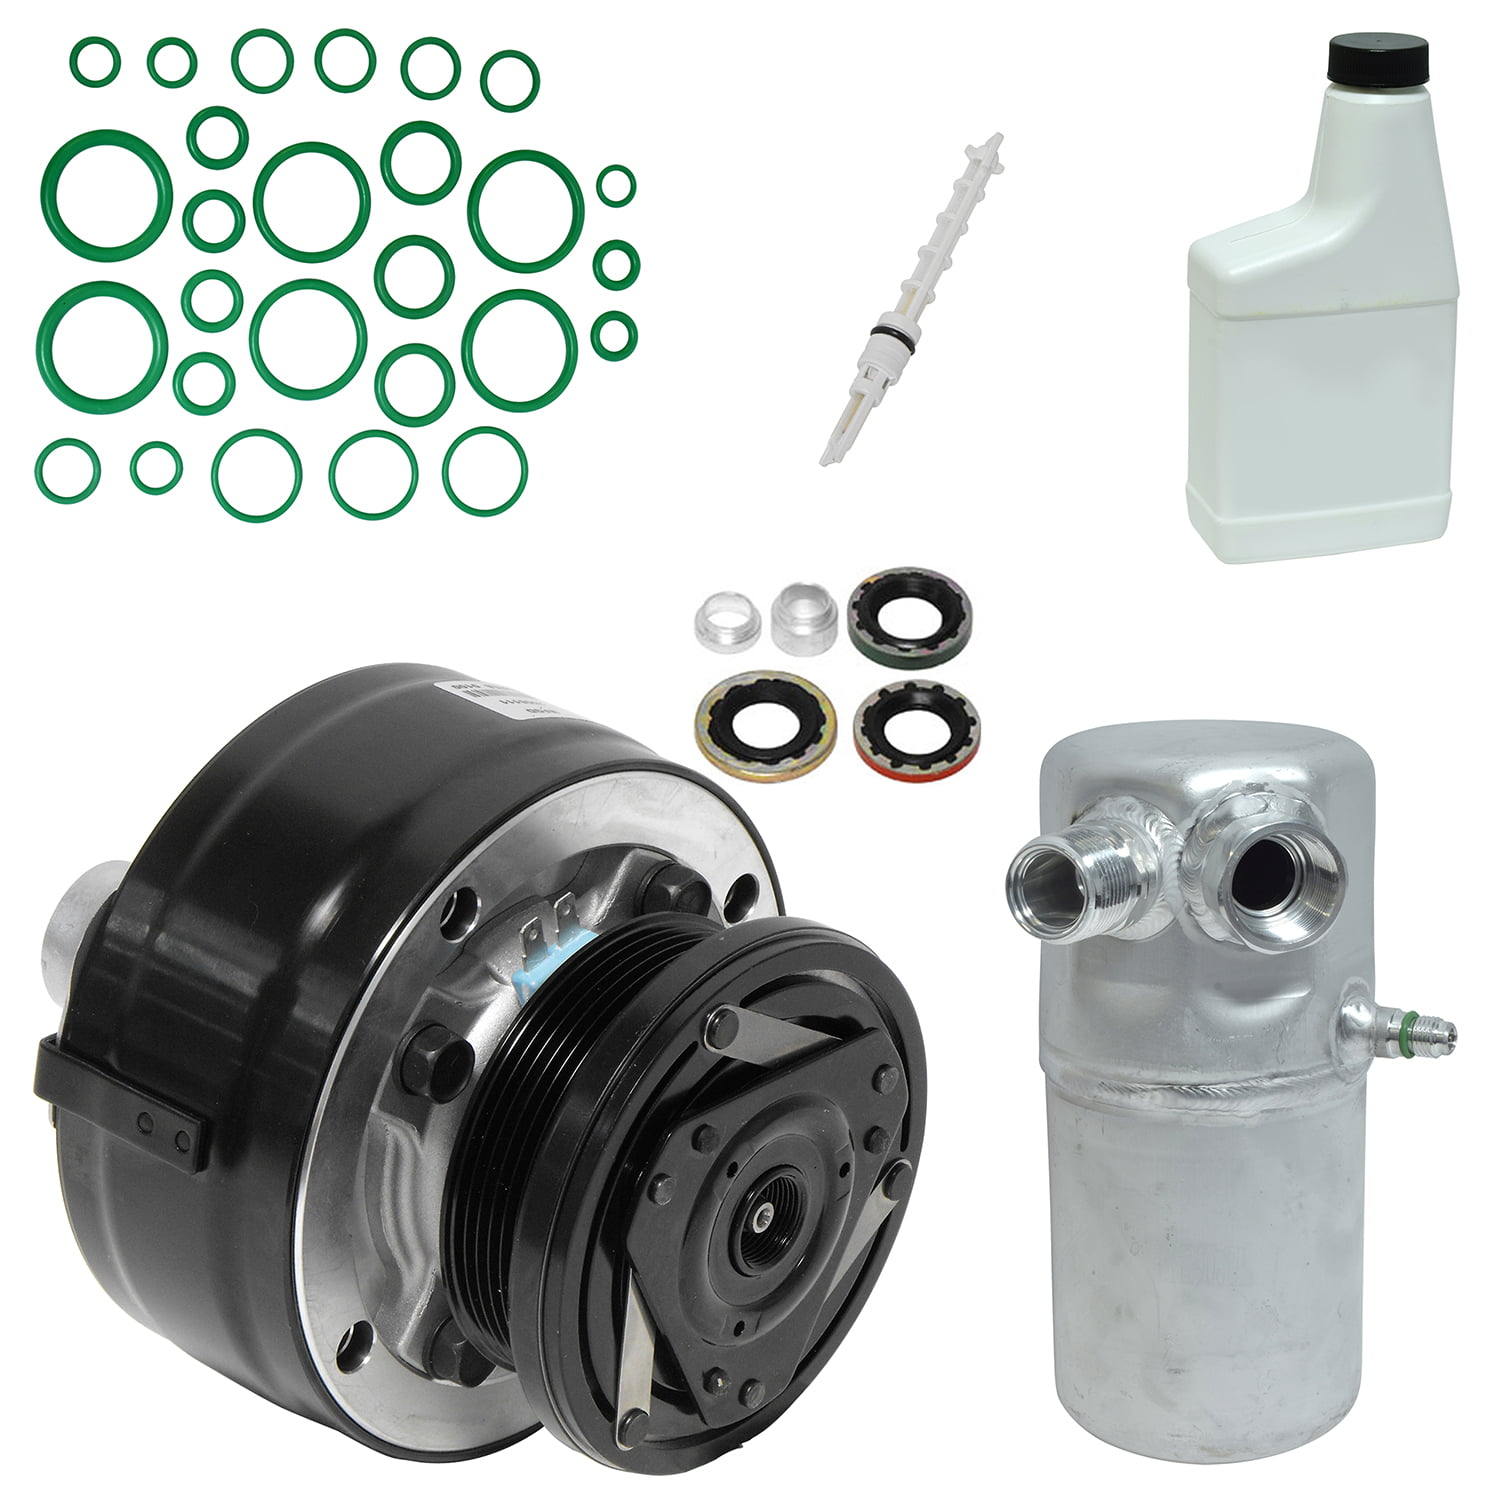 New A//C Compressor and Component Kit for C1500 K1500 C1500 C2500 K1500 K2500 C35